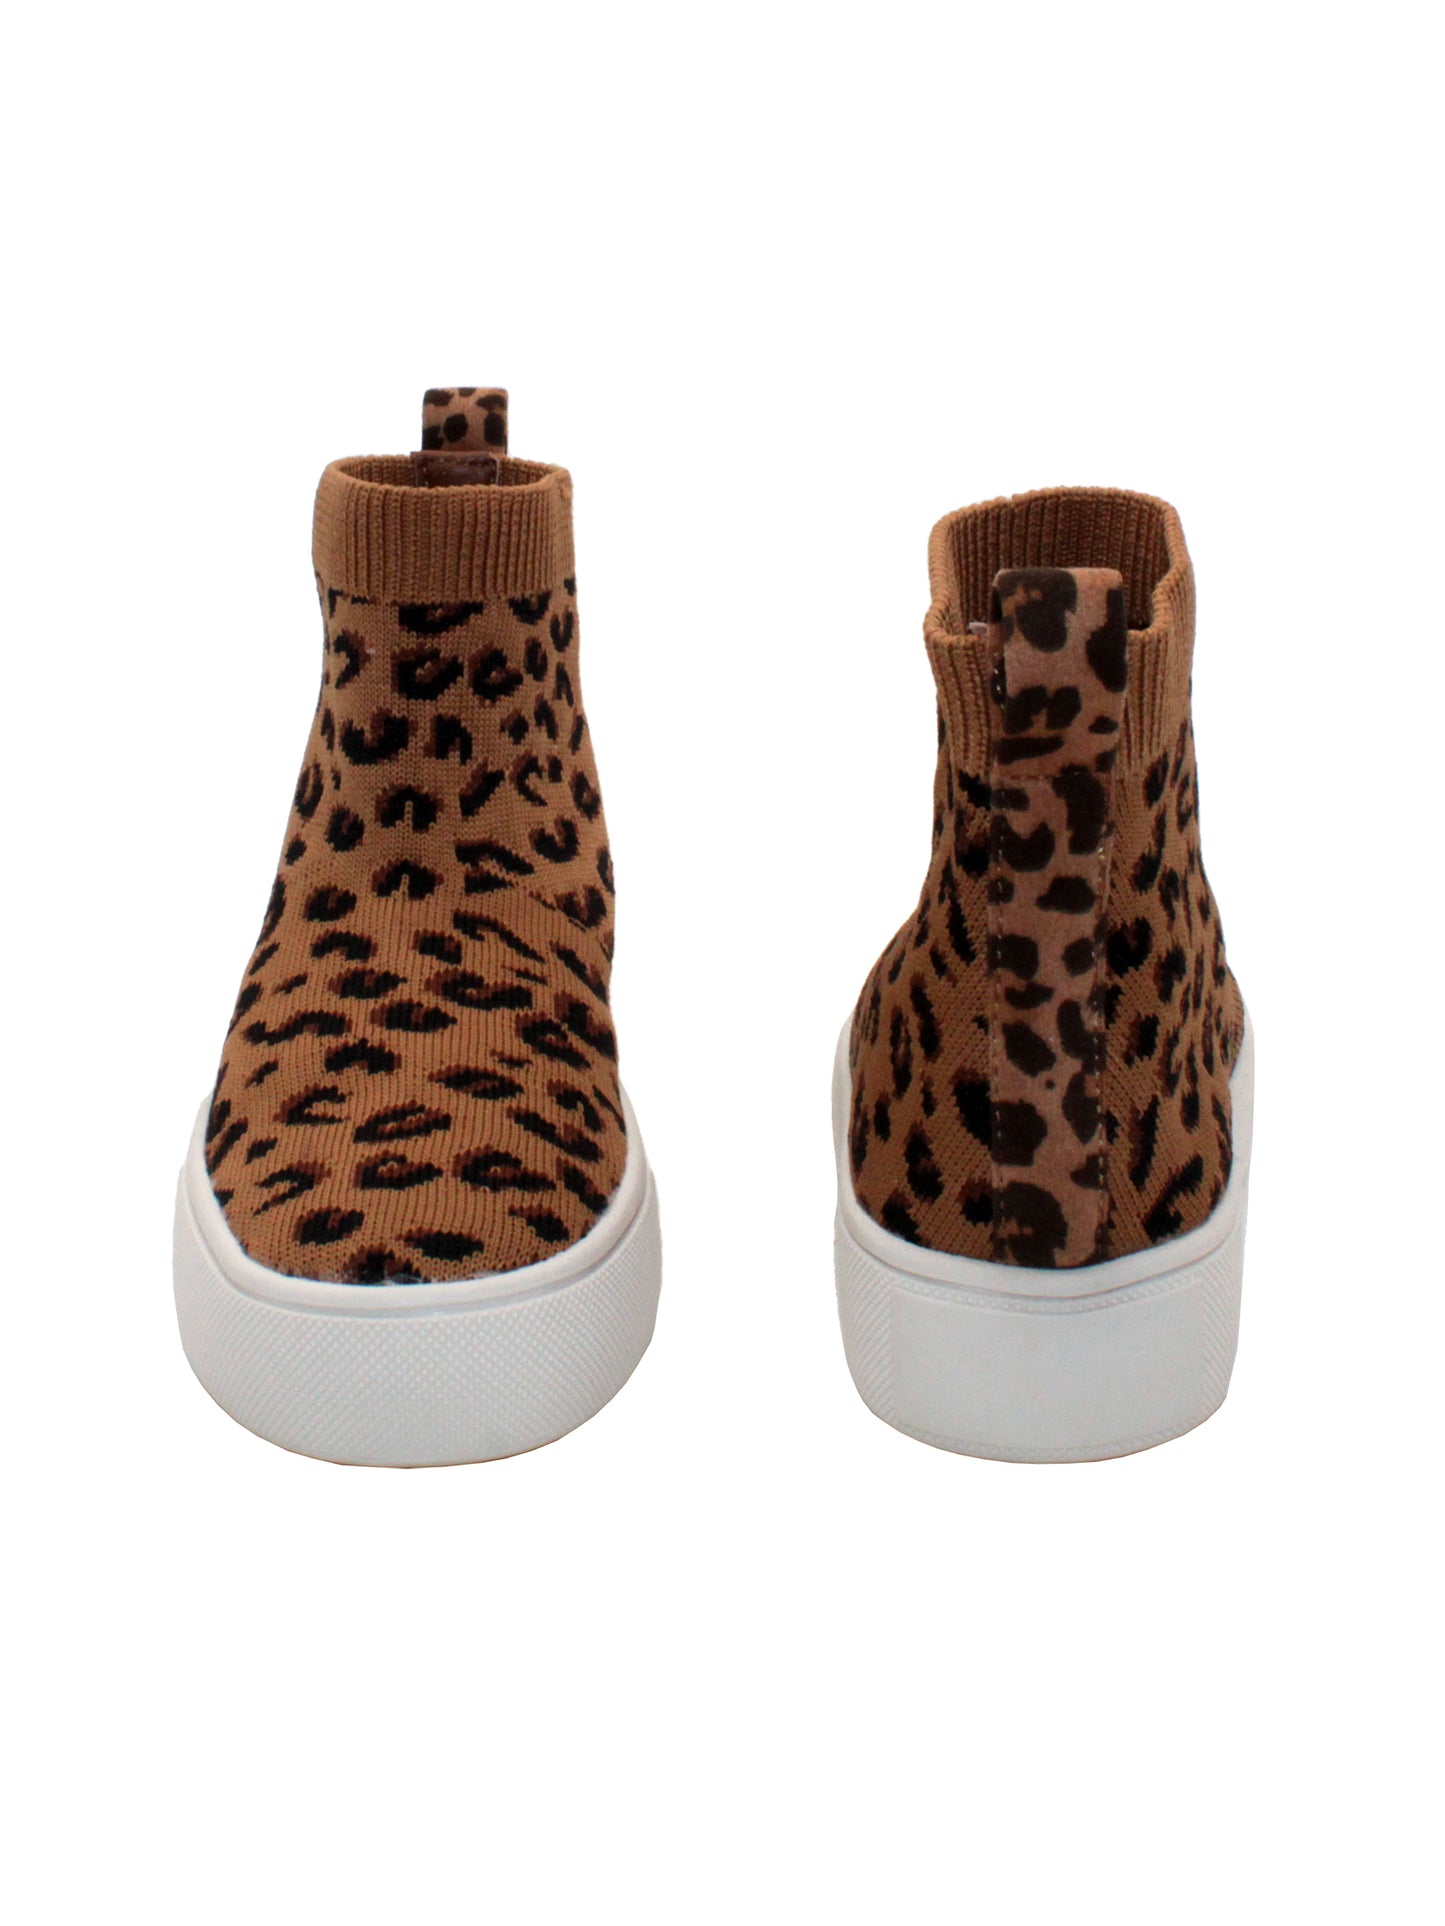 Stretch knit upper with back pull tab Stretch knit lining Internal nylon zipper Slip-on bootie sneaker style Signature ultra comfort EVA insole Approx. 3.5” shaft height Textured rubber sneaker bottom leopard front and back